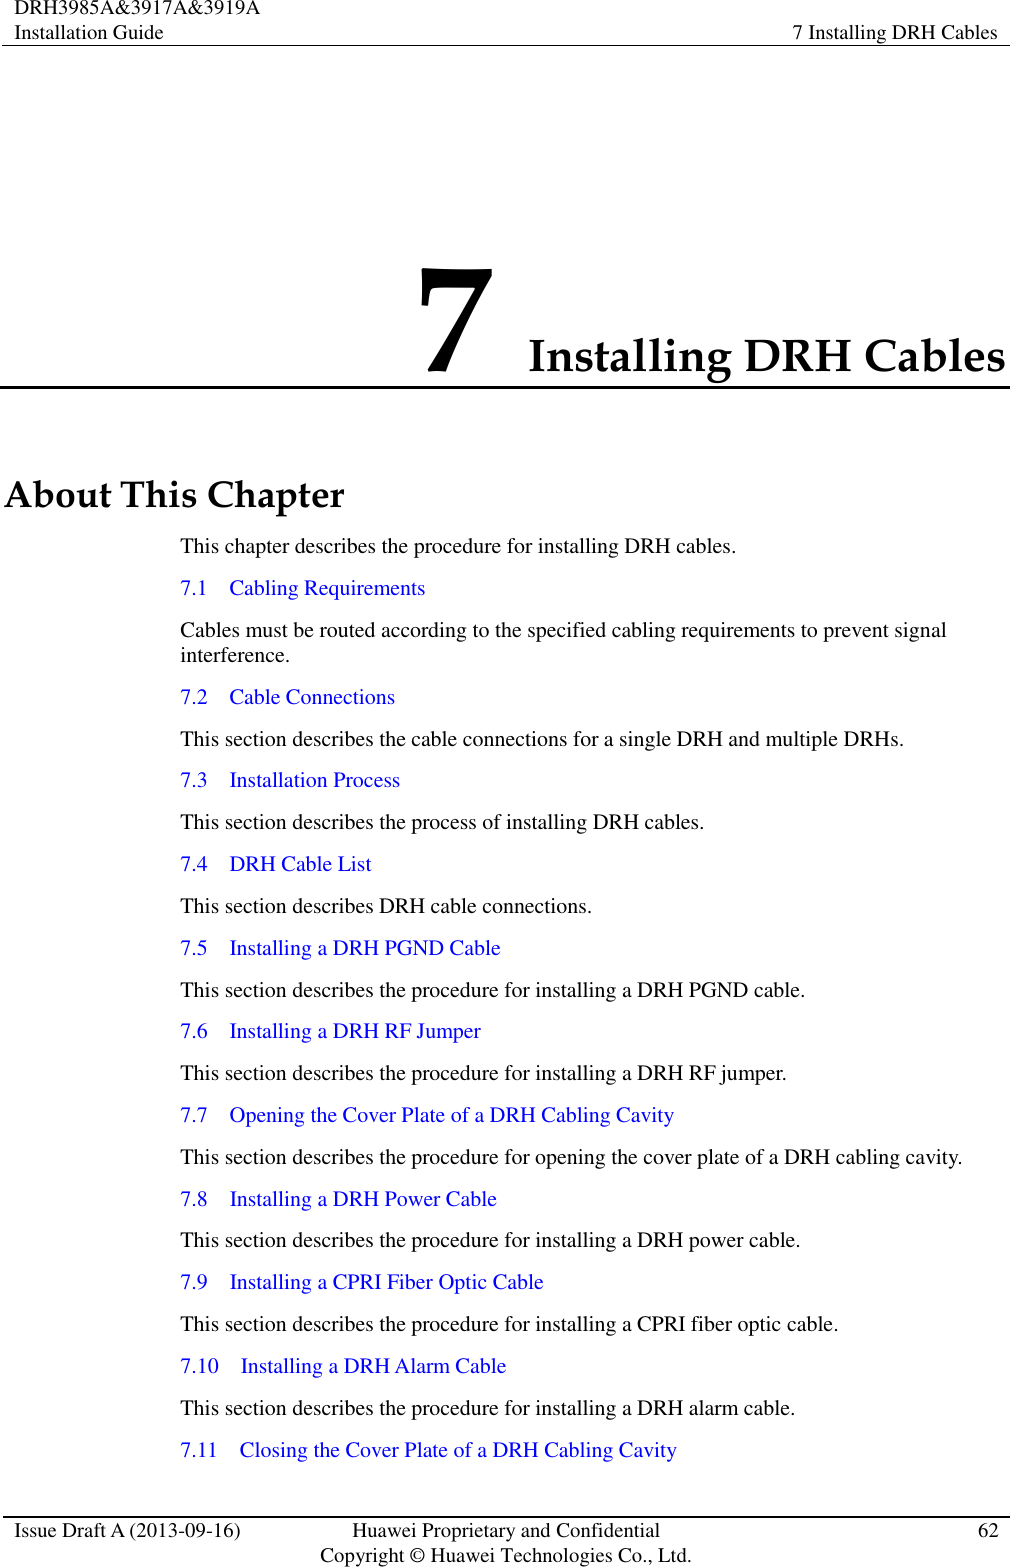 DRH3985A&amp;3917A&amp;3919A Installation Guide 7 Installing DRH Cables  Issue Draft A (2013-09-16) Huawei Proprietary and Confidential                                     Copyright © Huawei Technologies Co., Ltd. 62  7 Installing DRH Cables About This Chapter This chapter describes the procedure for installing DRH cables.   7.1    Cabling Requirements Cables must be routed according to the specified cabling requirements to prevent signal interference. 7.2    Cable Connections This section describes the cable connections for a single DRH and multiple DRHs. 7.3    Installation Process This section describes the process of installing DRH cables. 7.4    DRH Cable List This section describes DRH cable connections. 7.5    Installing a DRH PGND Cable This section describes the procedure for installing a DRH PGND cable. 7.6    Installing a DRH RF Jumper This section describes the procedure for installing a DRH RF jumper. 7.7  Opening the Cover Plate of a DRH Cabling Cavity This section describes the procedure for opening the cover plate of a DRH cabling cavity. 7.8  Installing a DRH Power Cable This section describes the procedure for installing a DRH power cable. 7.9  Installing a CPRI Fiber Optic Cable This section describes the procedure for installing a CPRI fiber optic cable. 7.10  Installing a DRH Alarm Cable This section describes the procedure for installing a DRH alarm cable. 7.11  Closing the Cover Plate of a DRH Cabling Cavity 